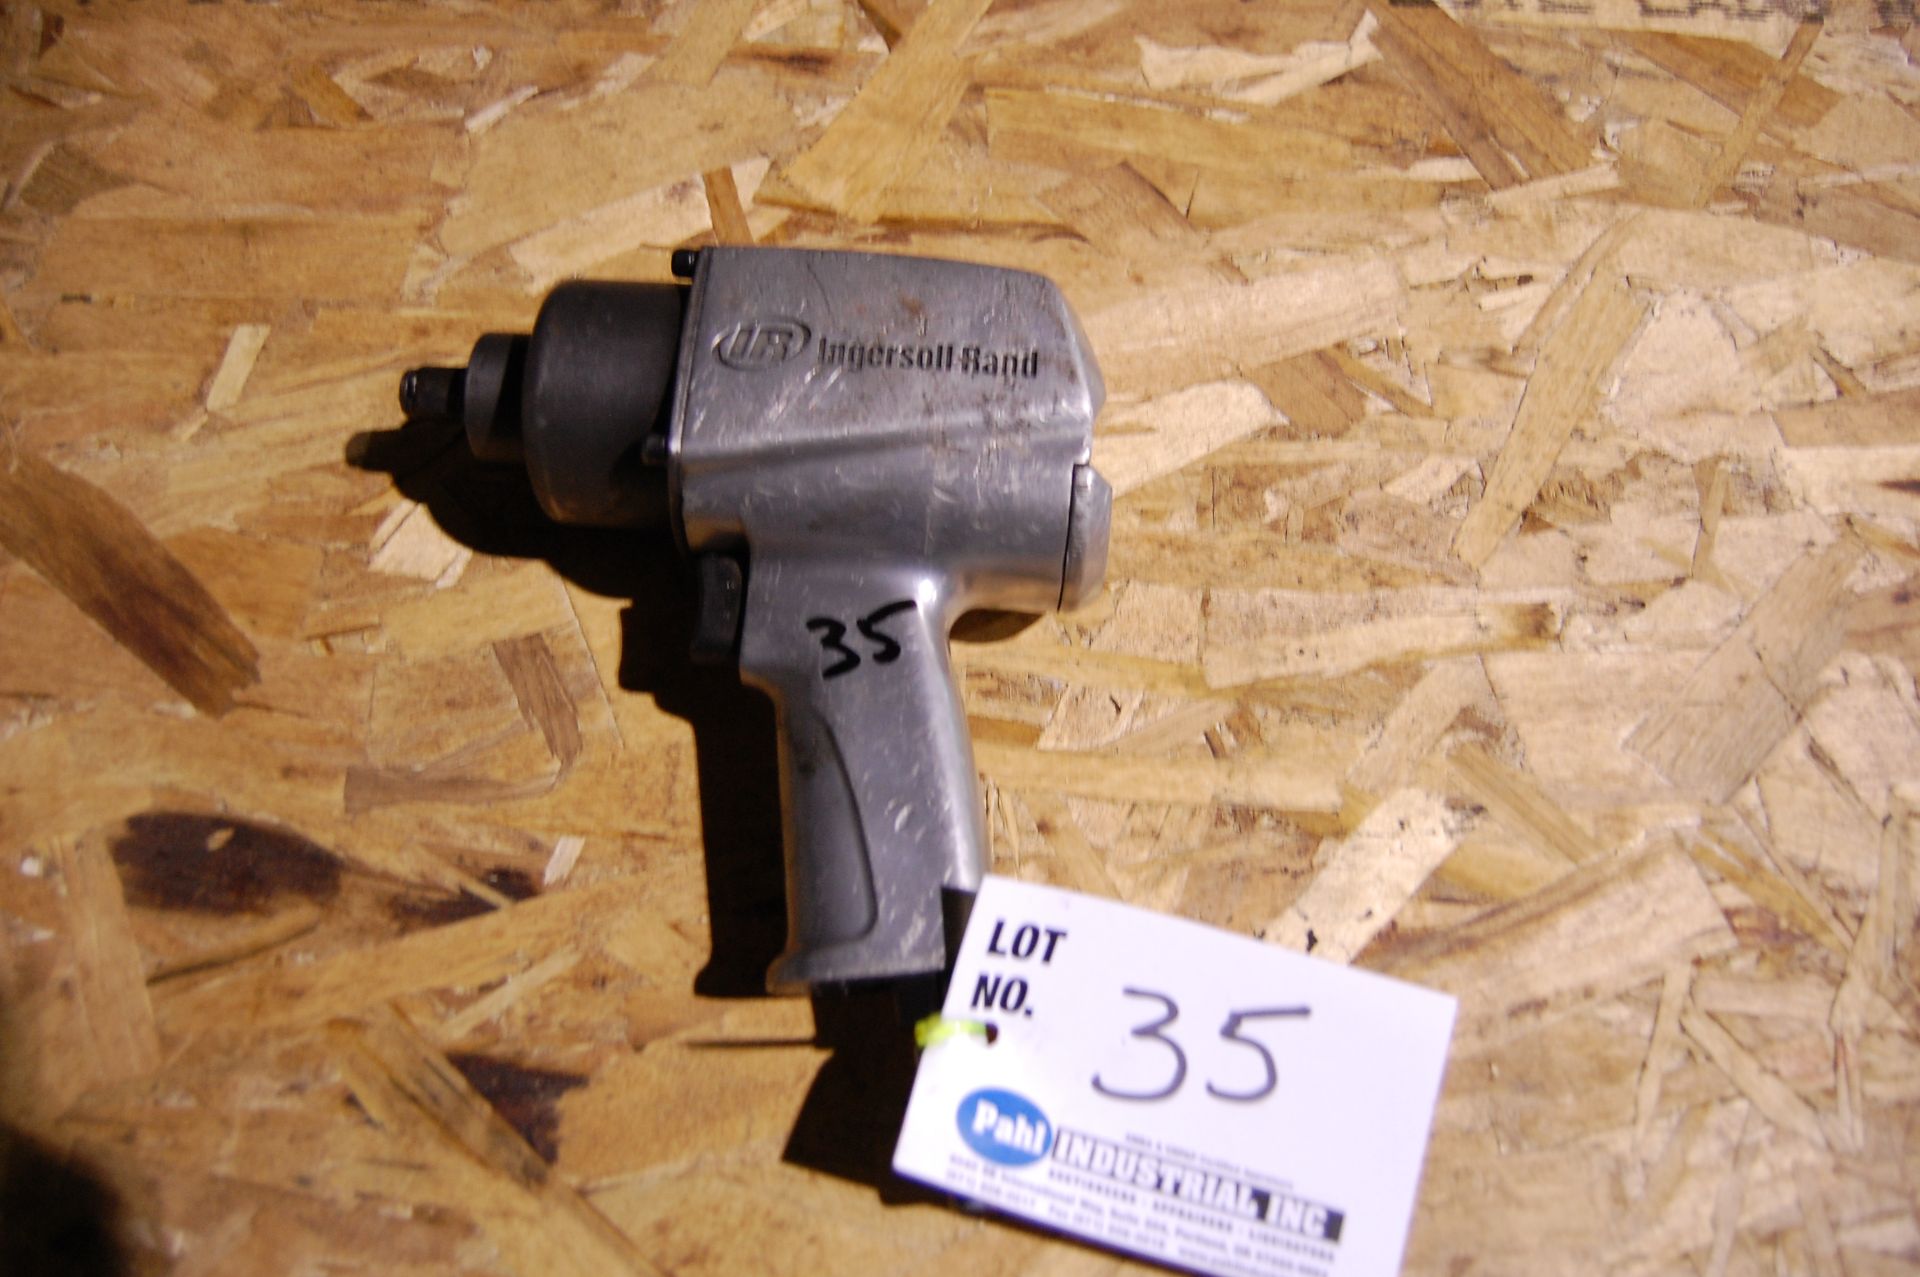 Ingersoll Rand 1/2" Impact Wrench